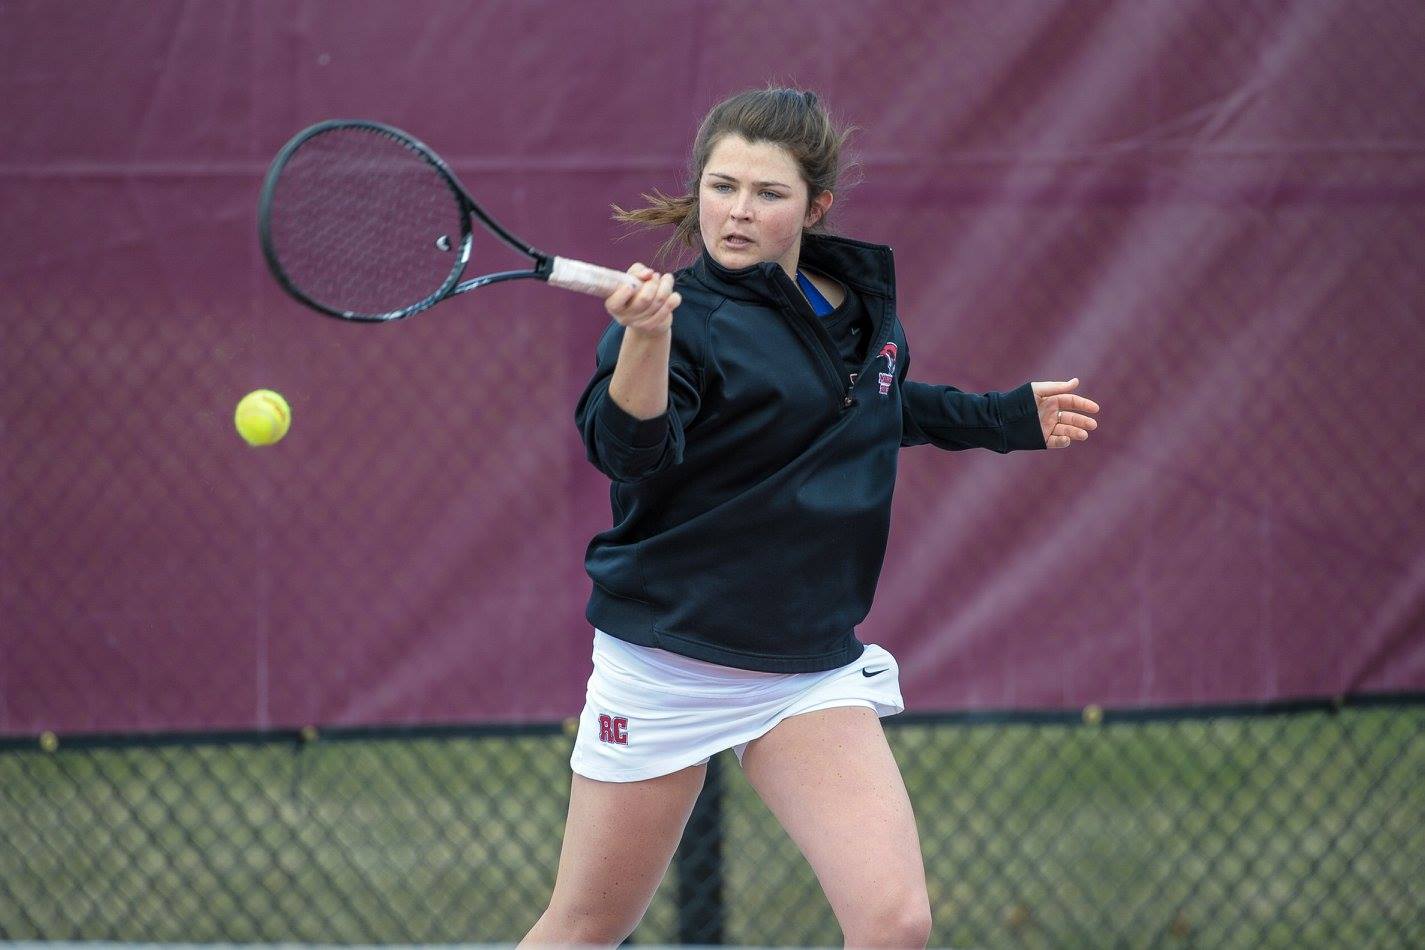 BC Takes 6-3 Women's Tennis Win Over RC